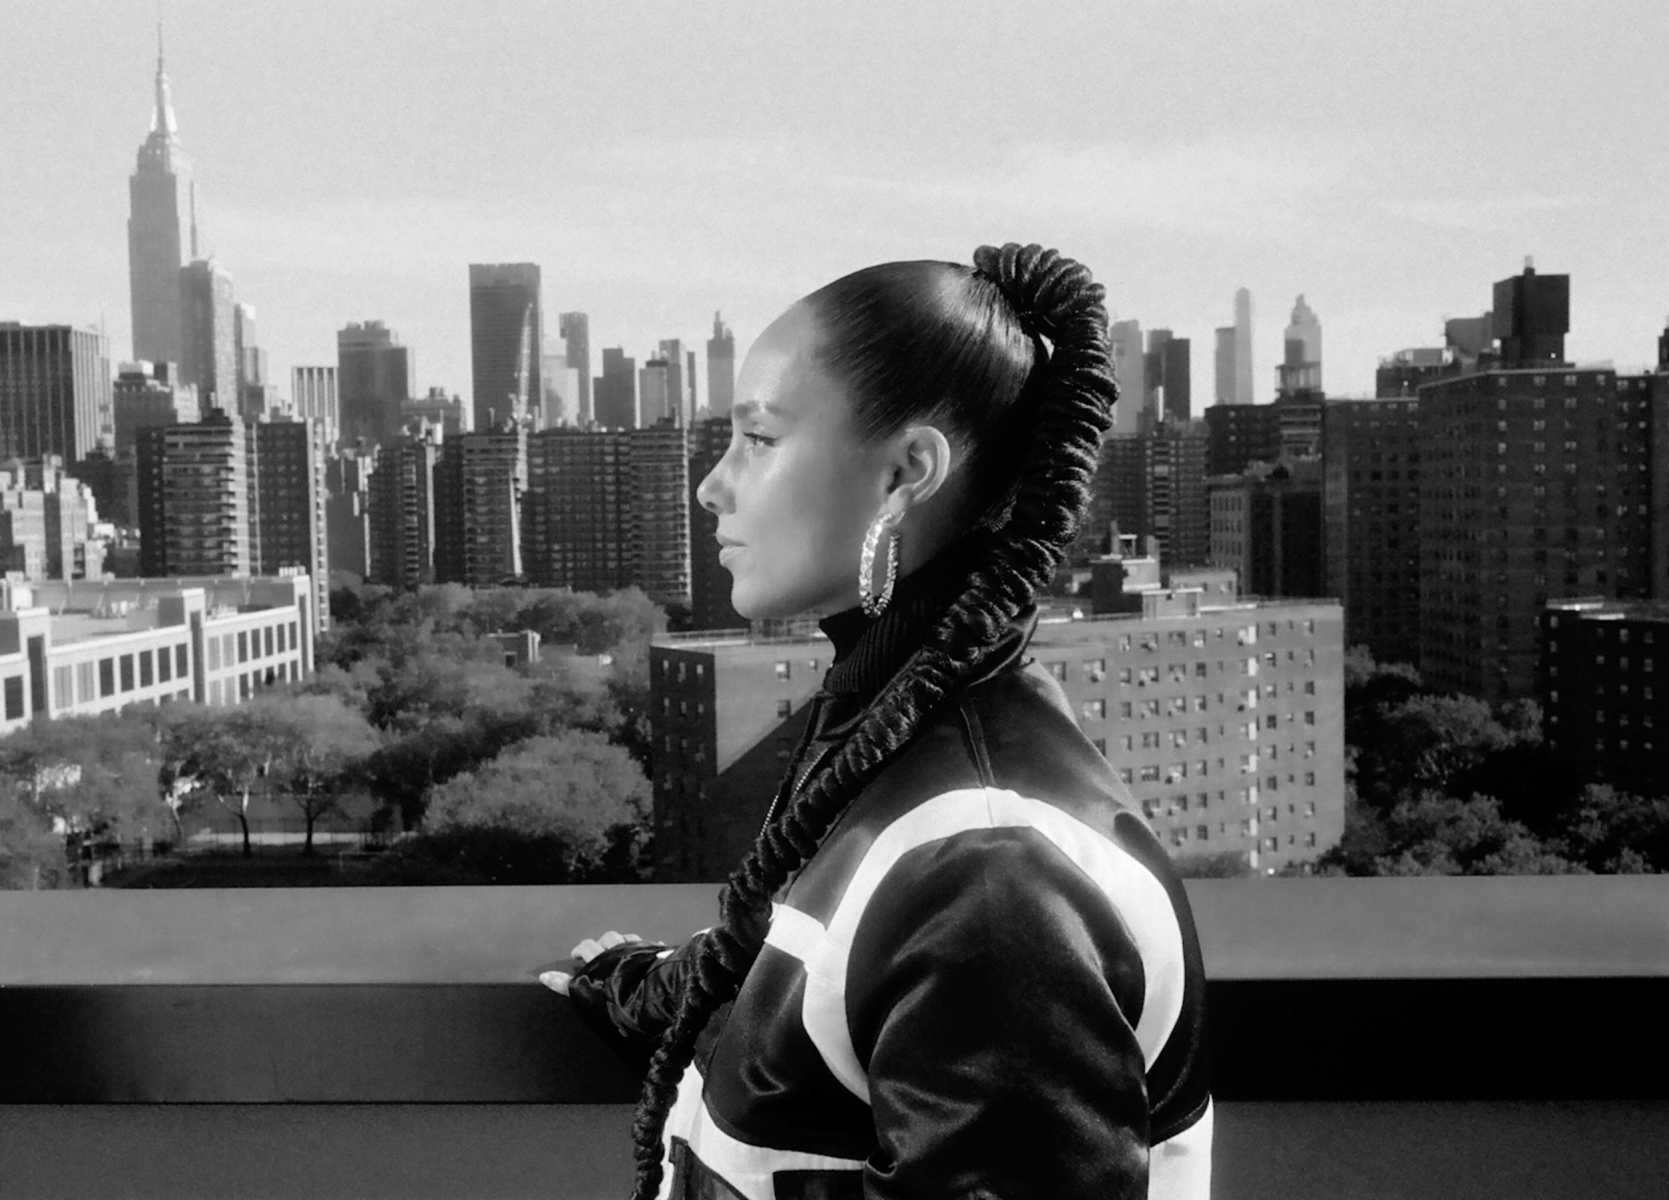 Mercedes-Benz and Alicia Keys empower women to go their own way